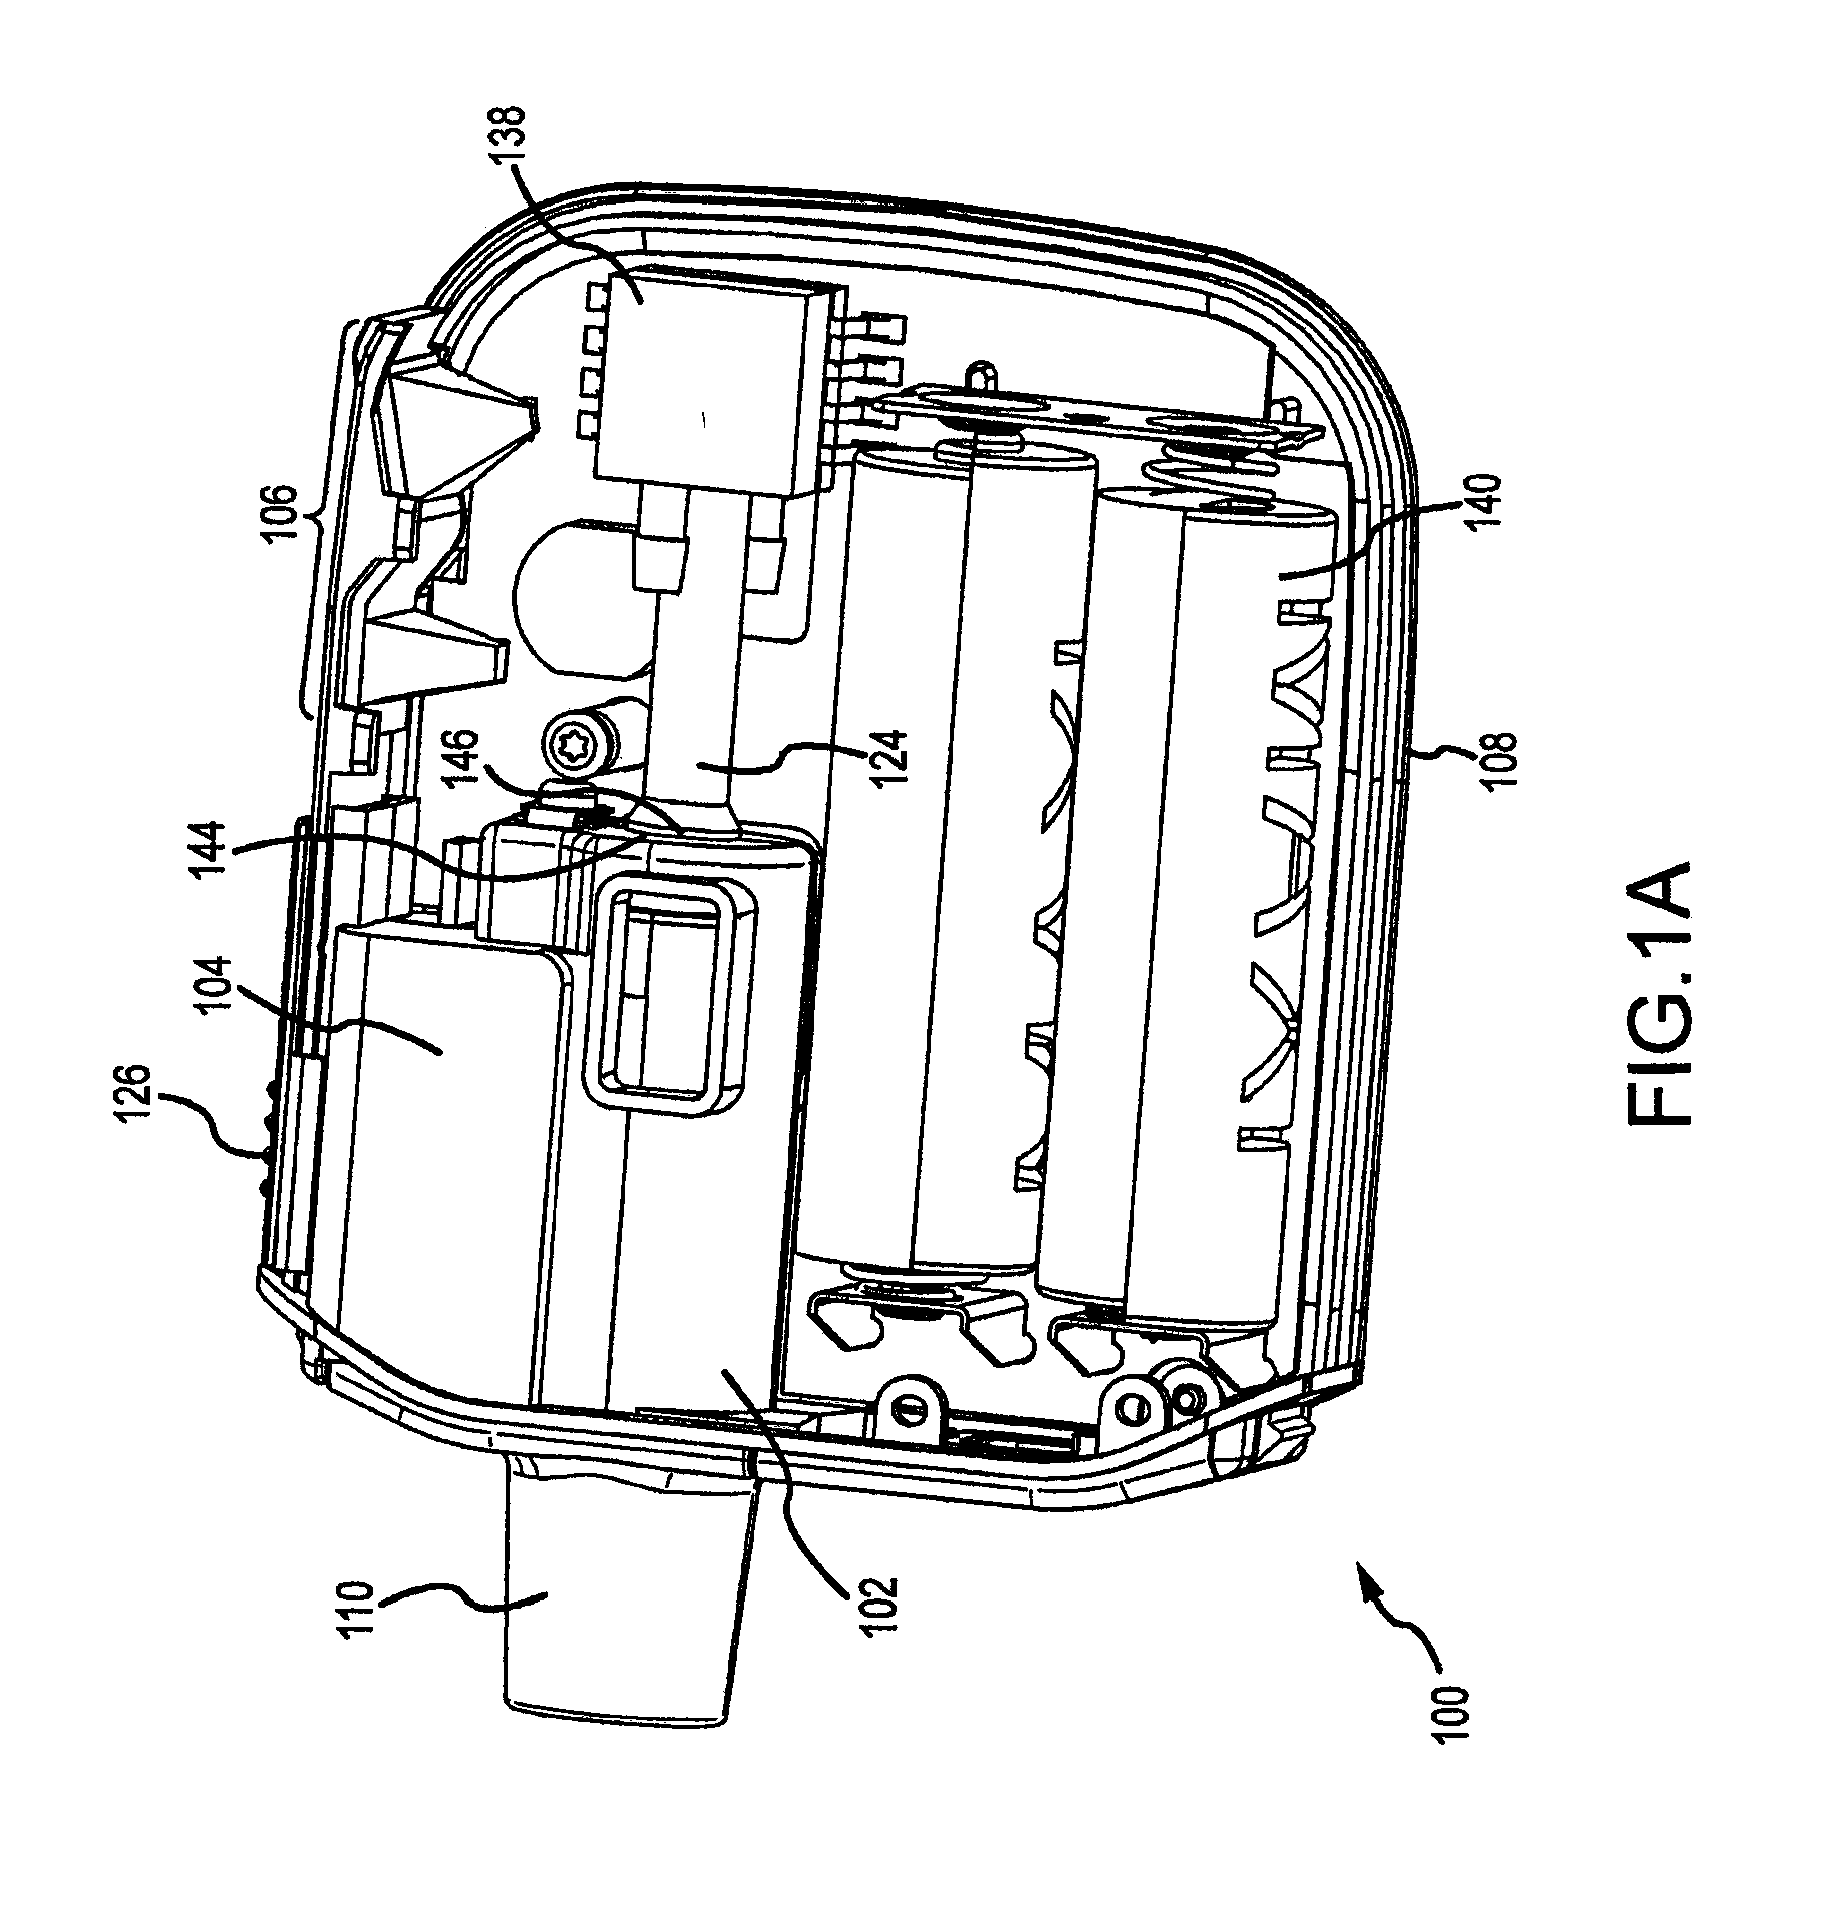 Liquid nebulization systems and methods